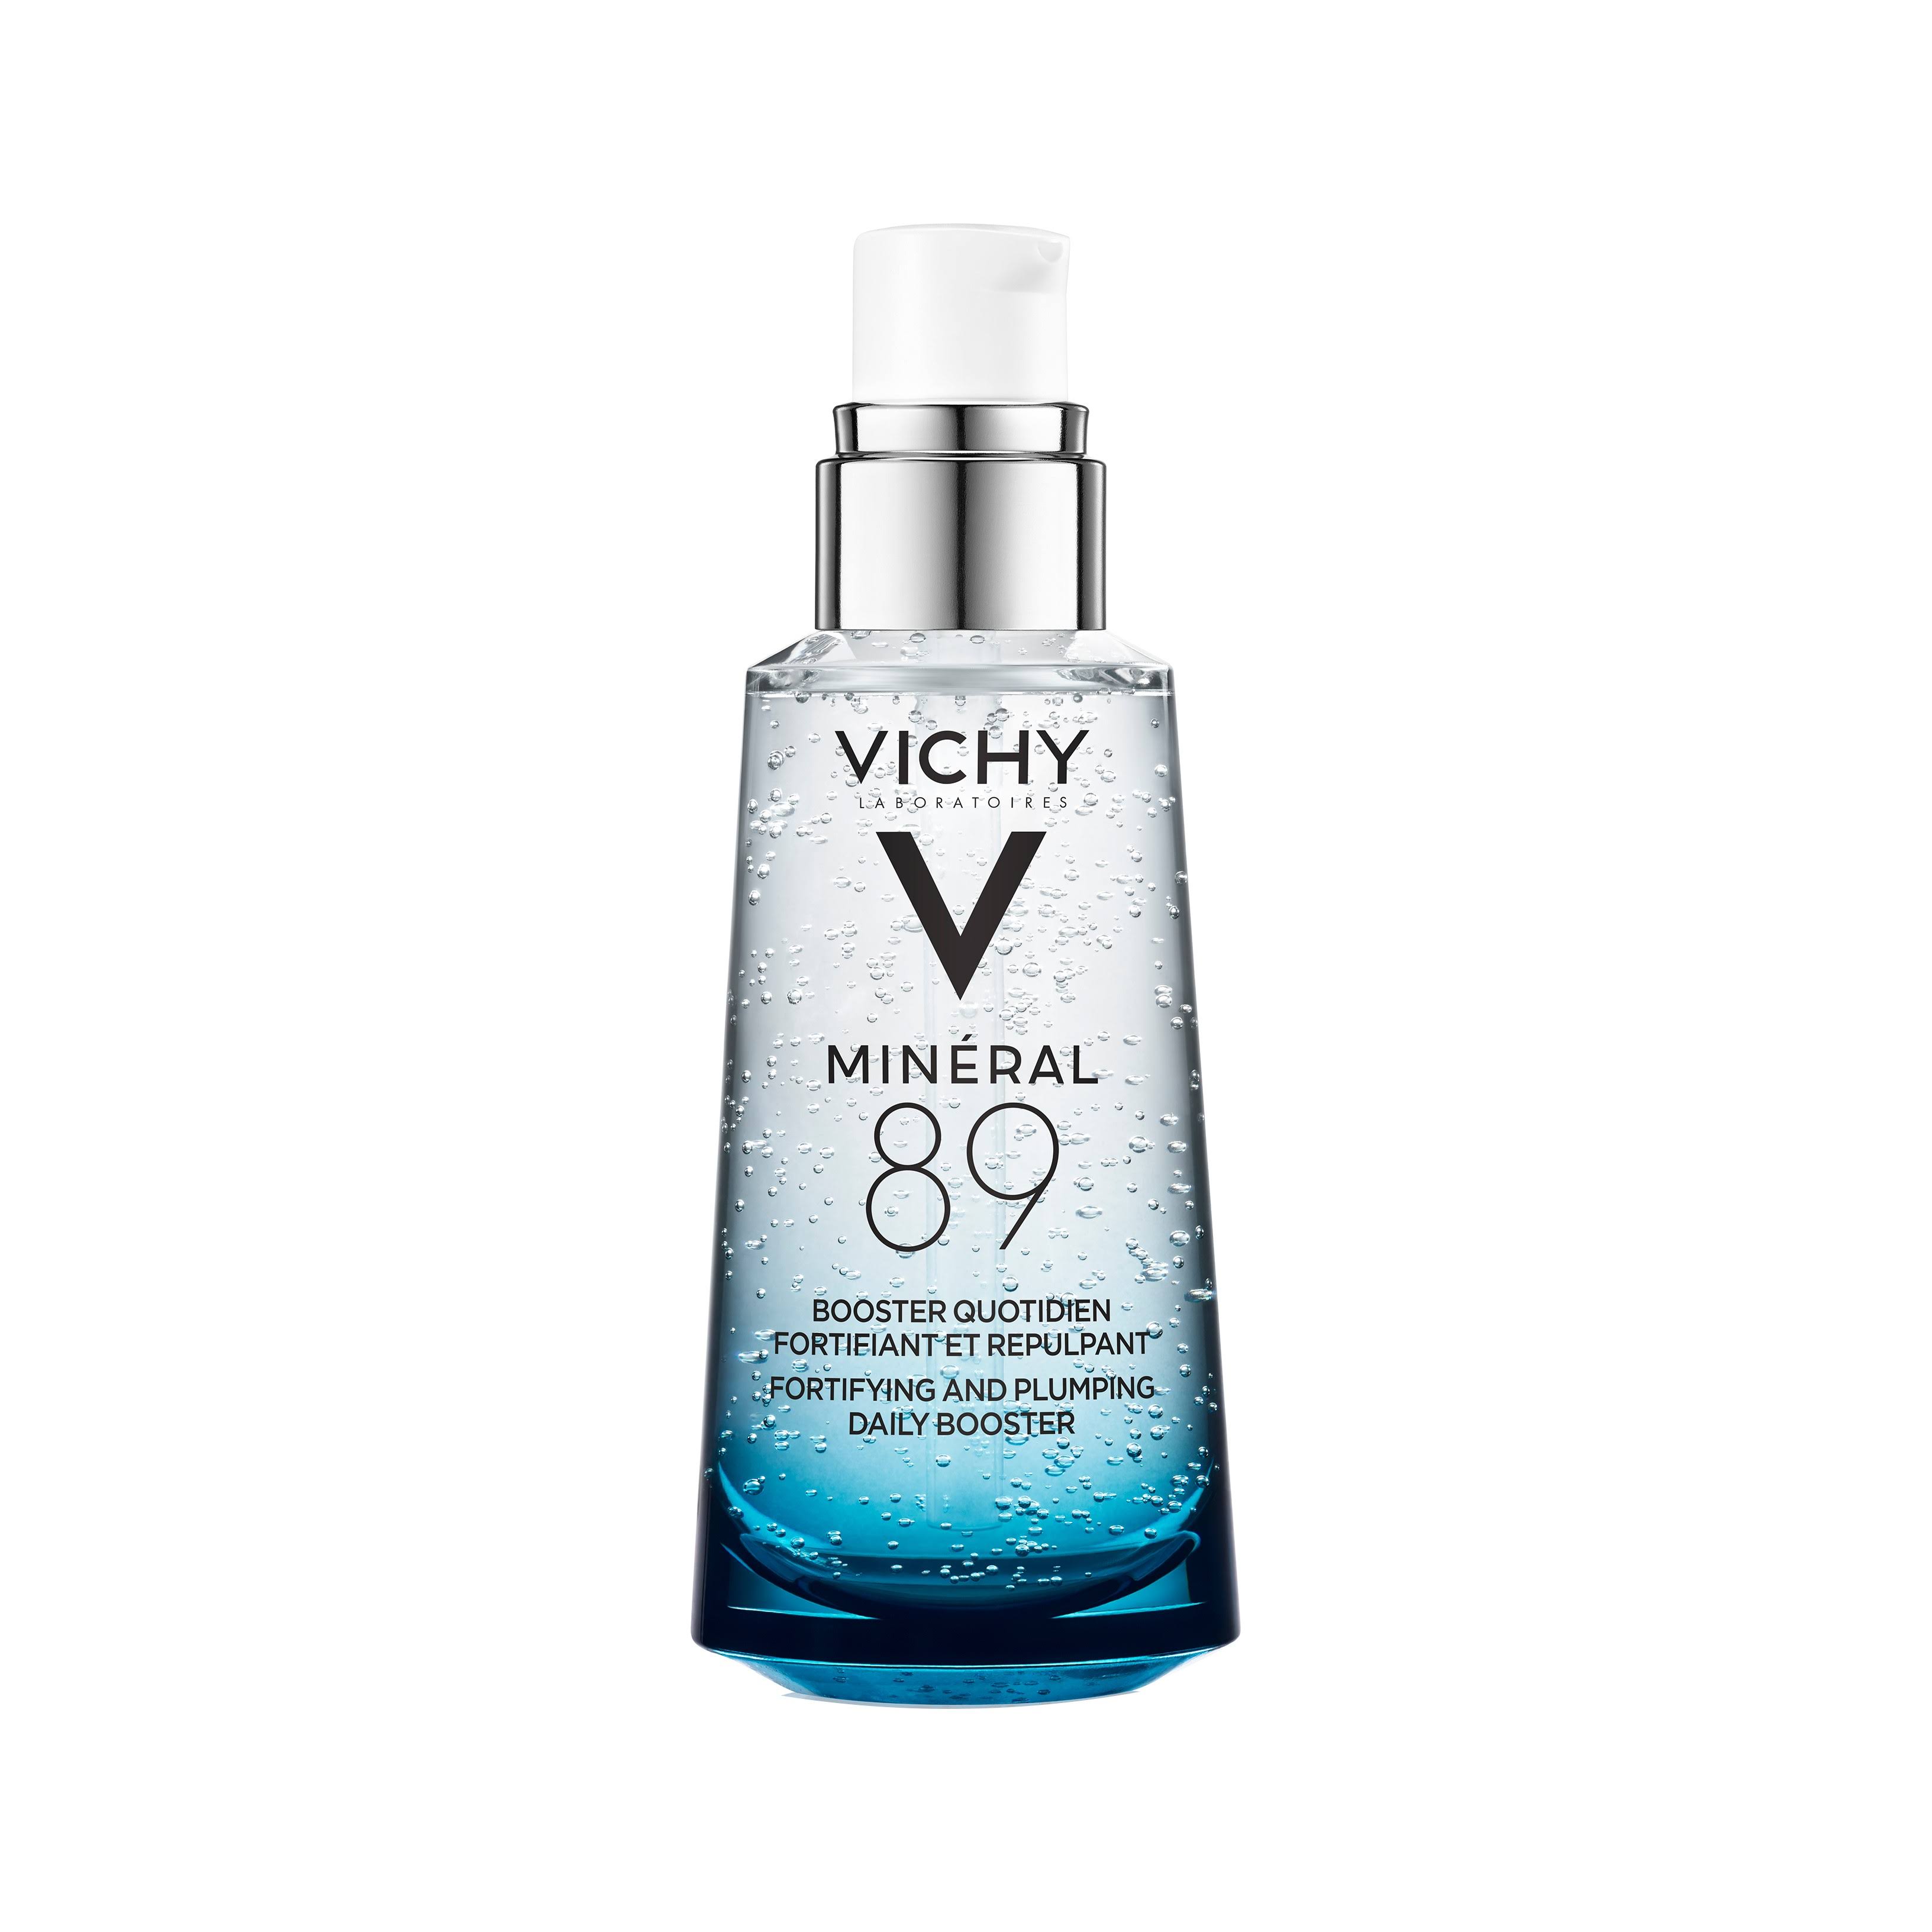 Vichy Mineral 89 Booster Hydratant Fortifiant Et Repulpant - 75ml